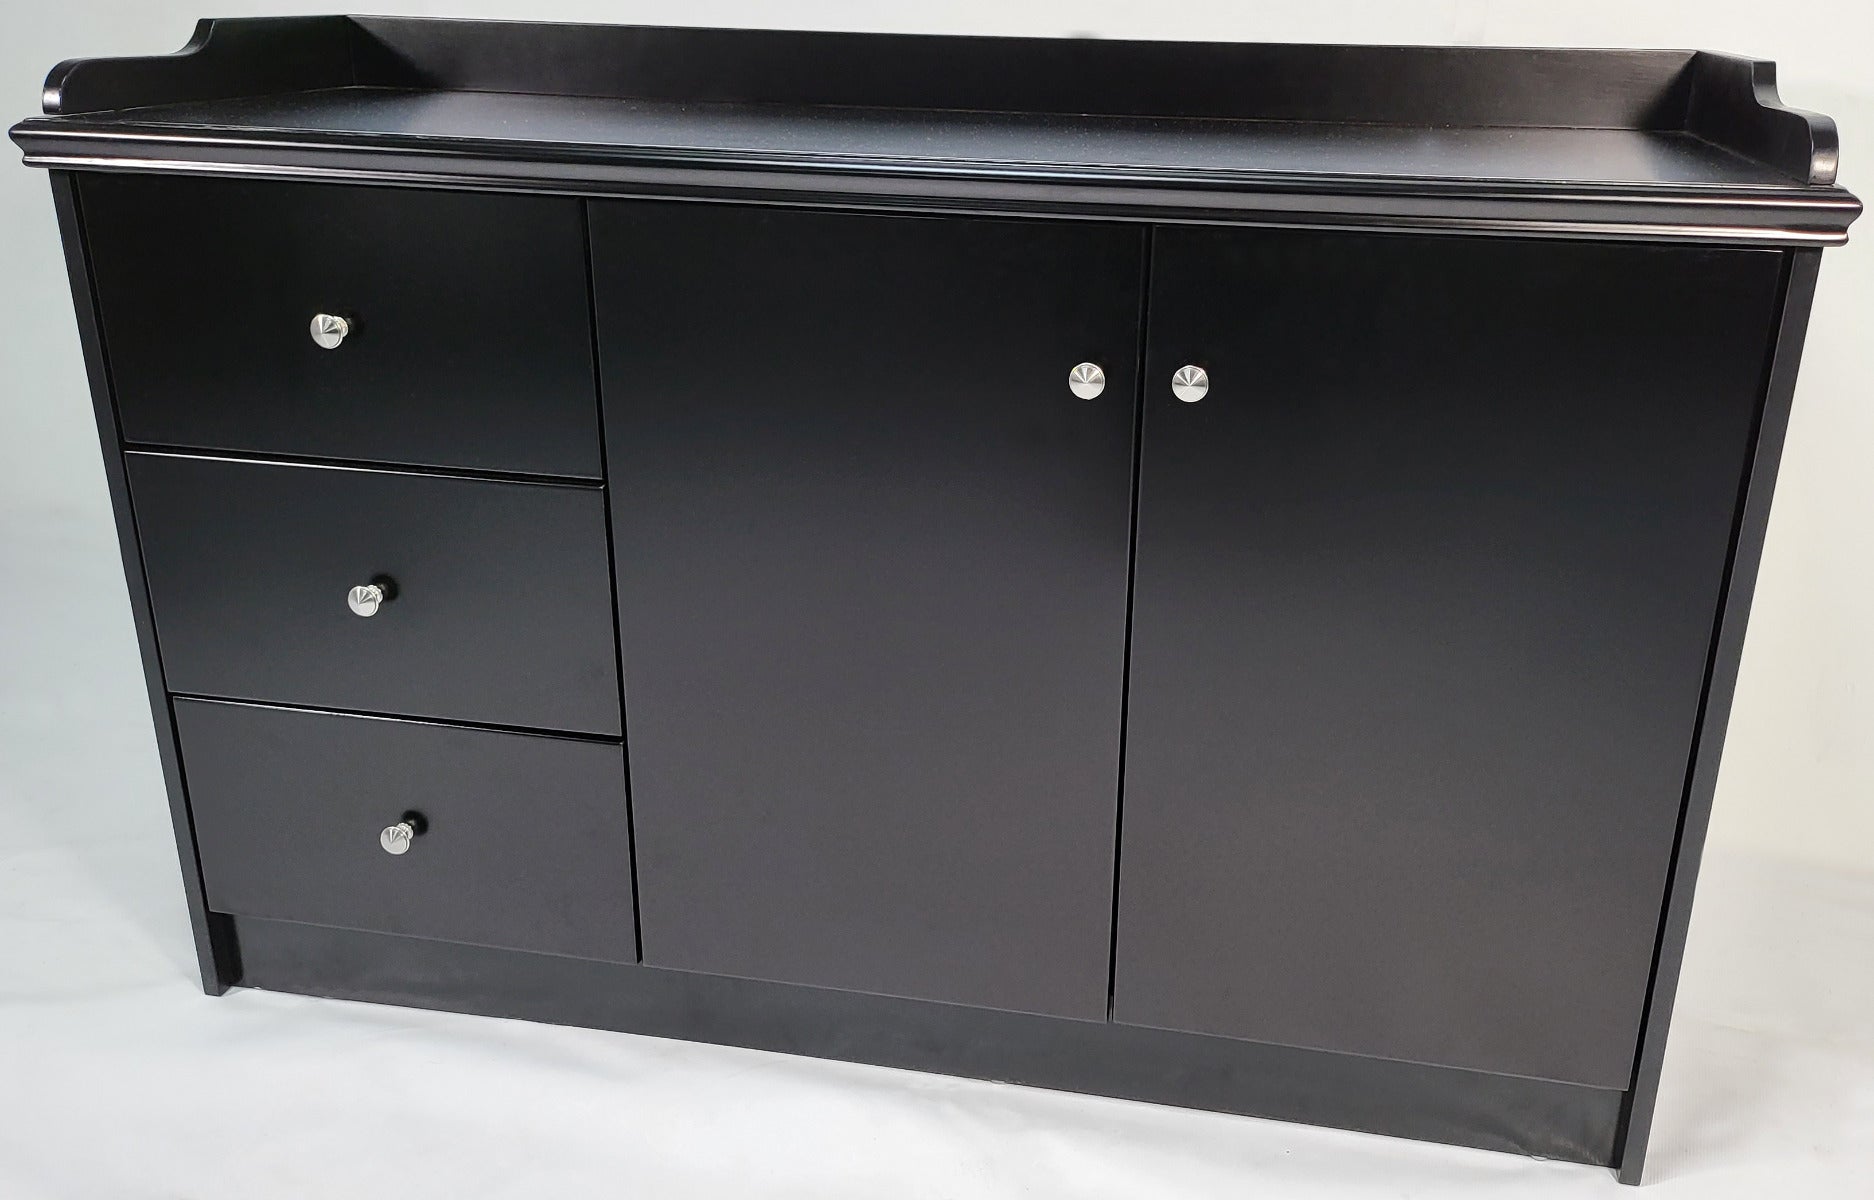 120cm Wide Black Cupboard with Integrated Drawers - 2K01 Near Me